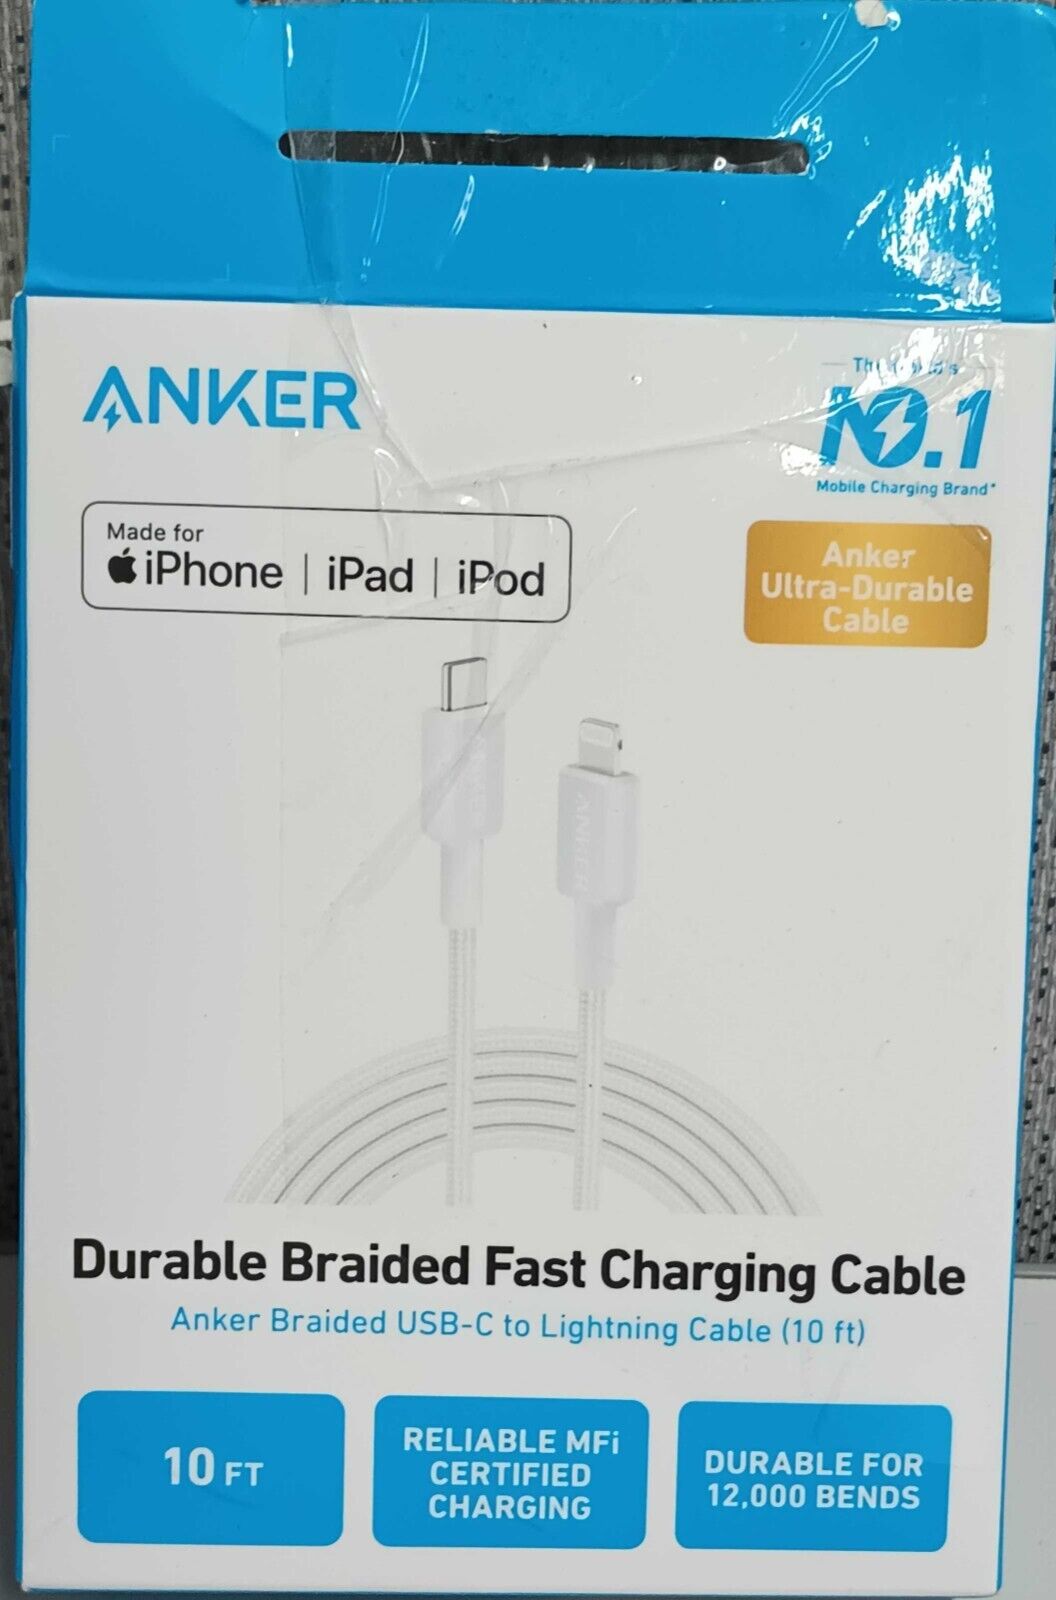 Anker 10' Bio-Braided Lightning to USB-C ECO Friendly Fast Charging Cable -White